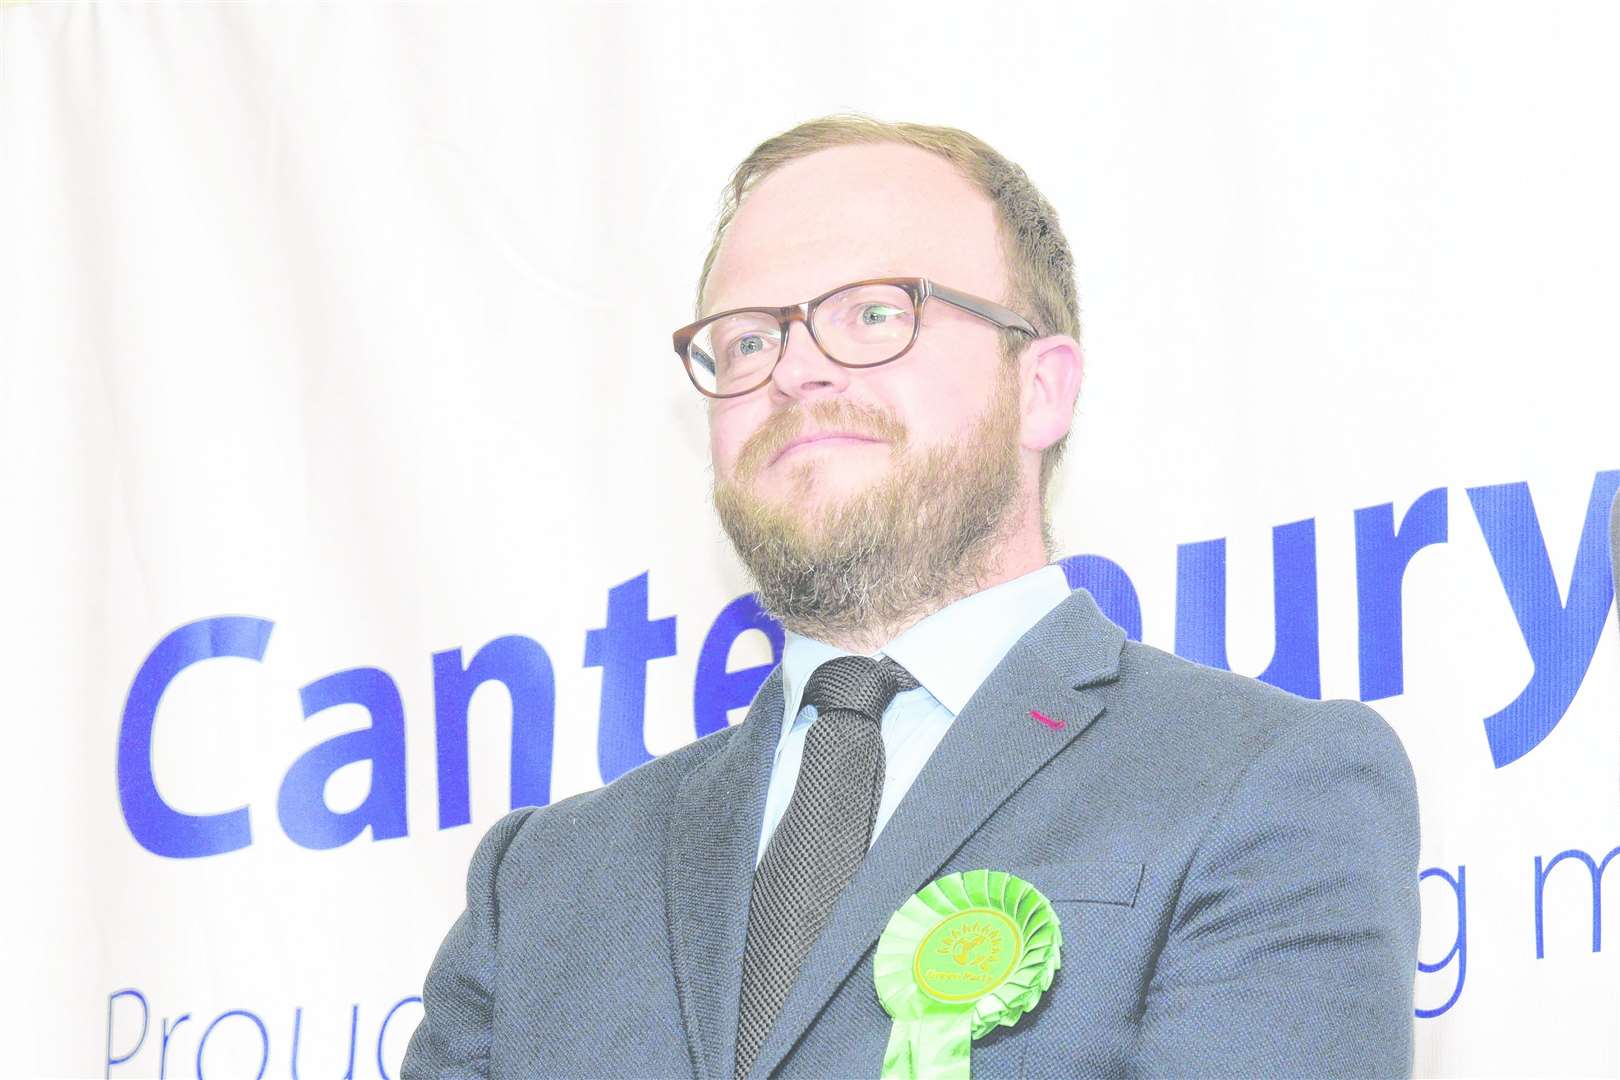 The Green Party's Henry Stanton